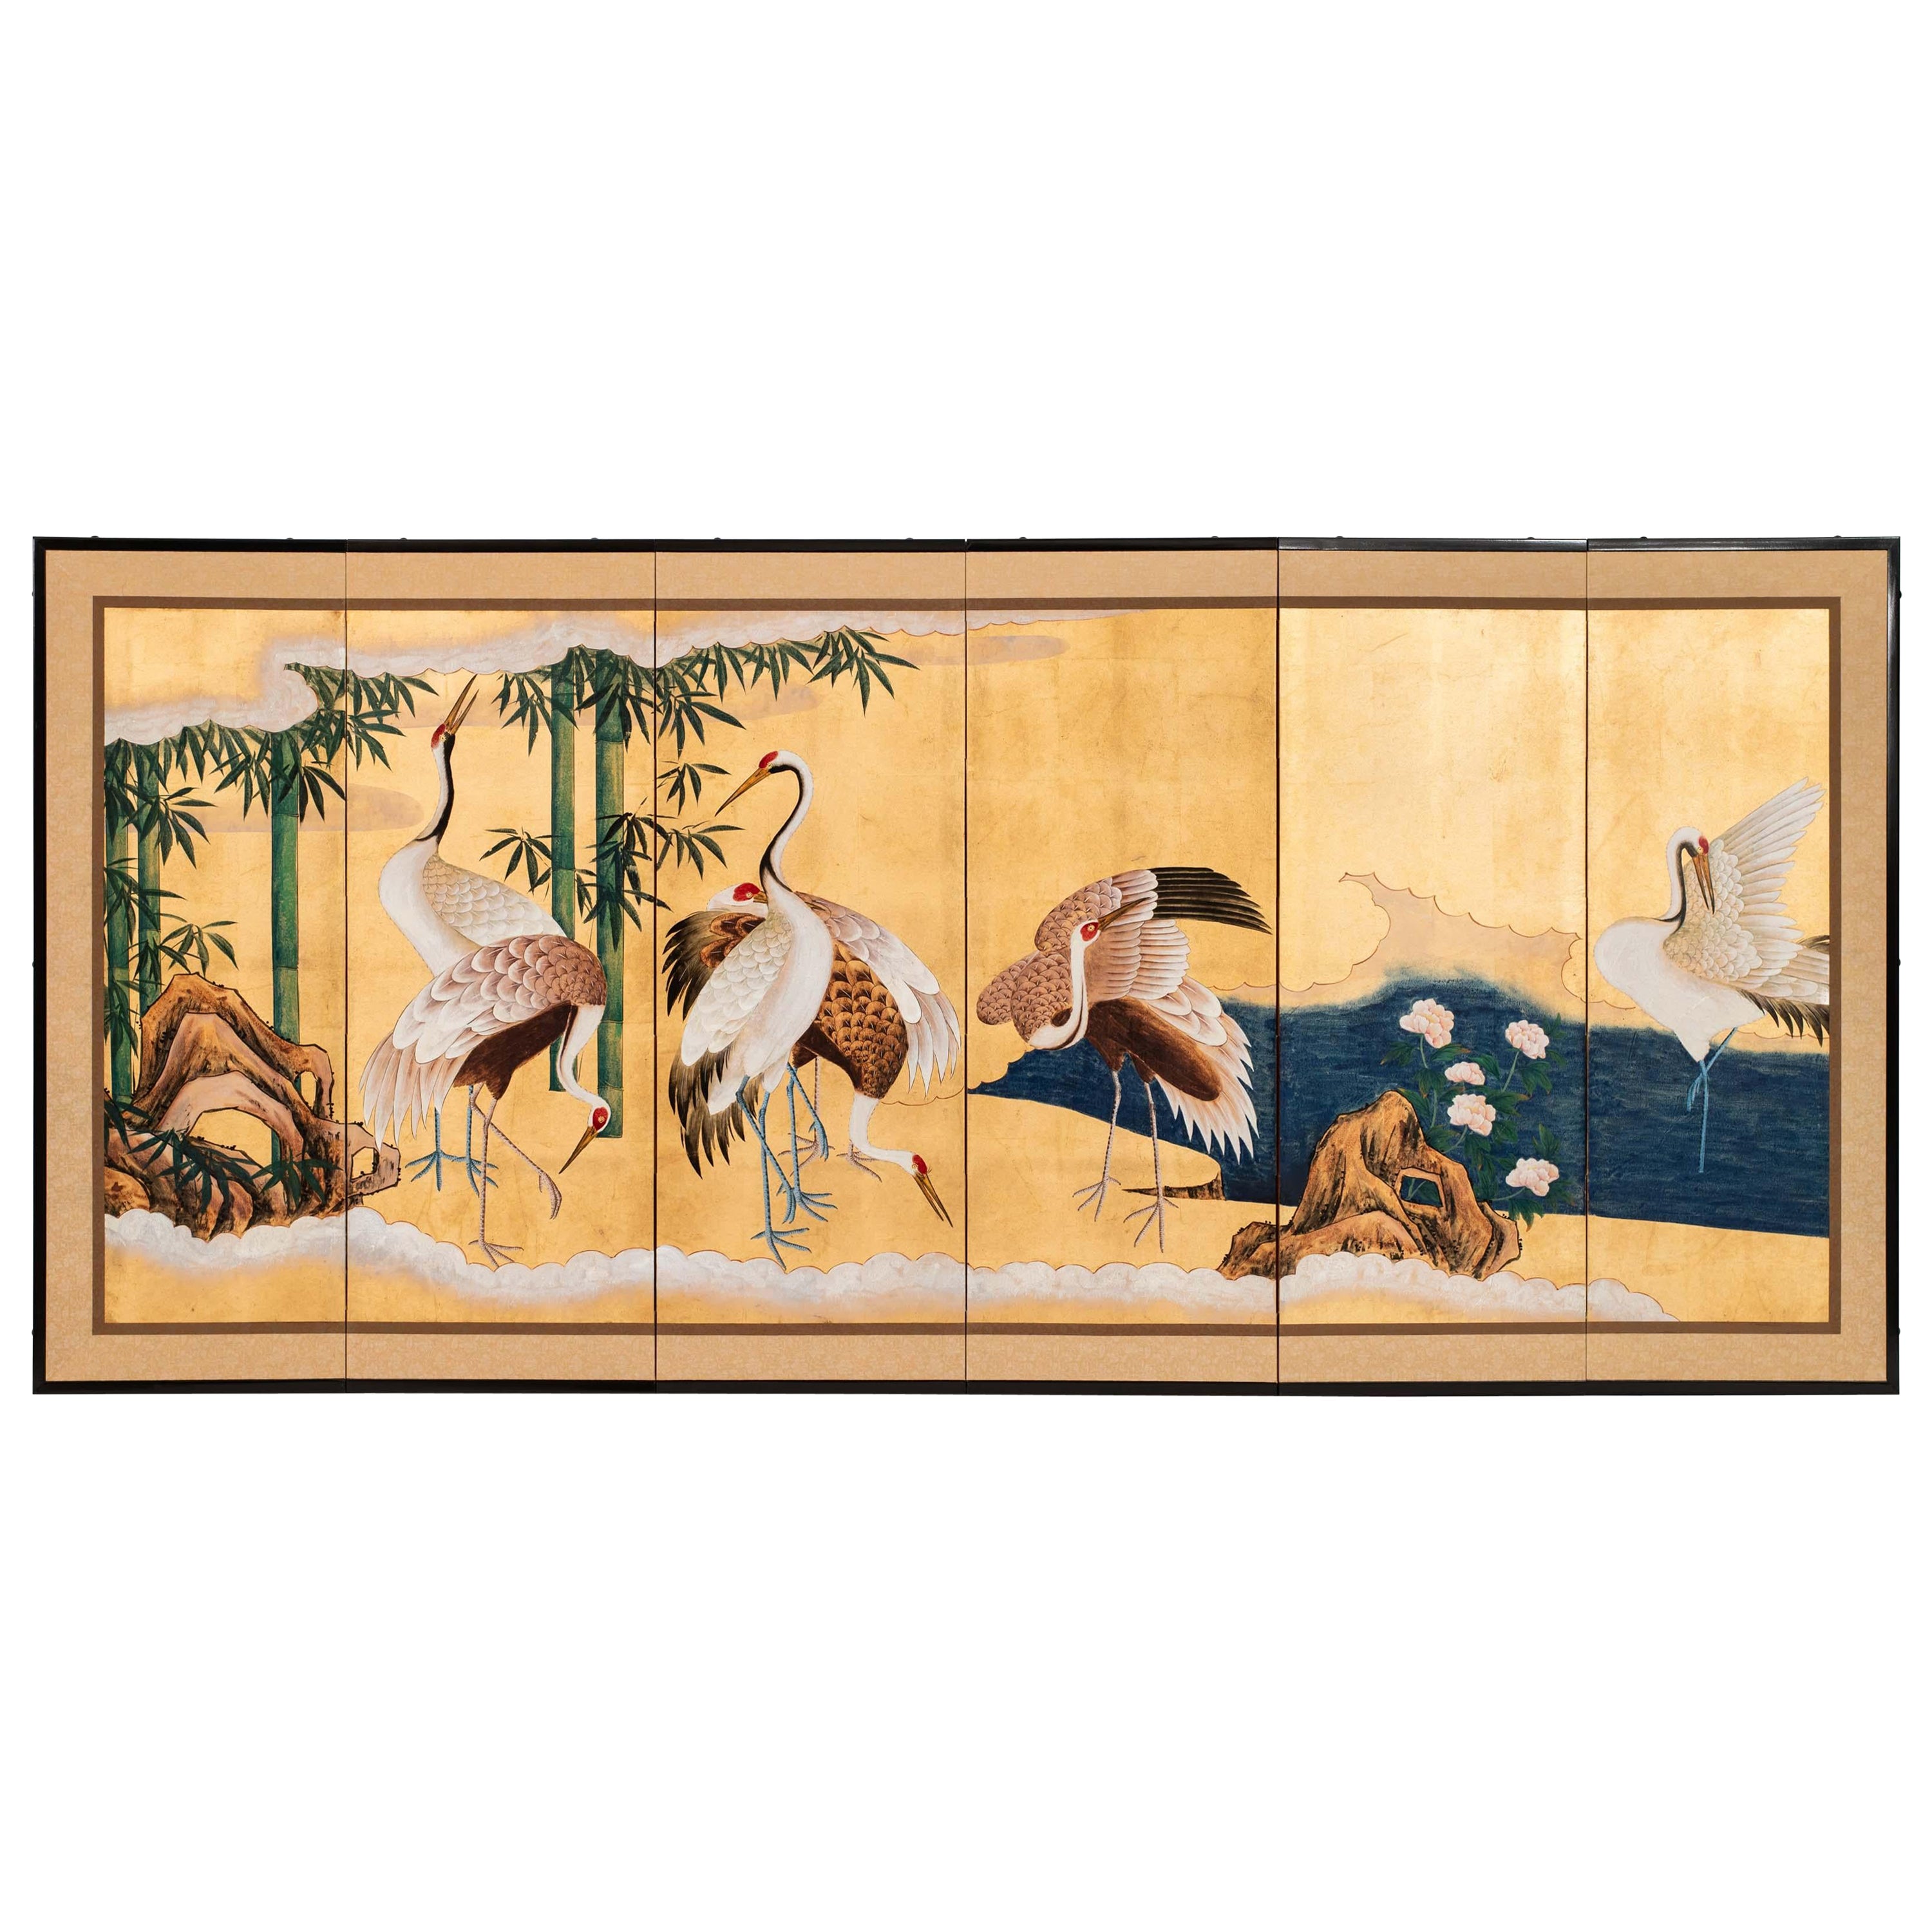 Contemporary Hand-Painted Japanese Screen of Gathering of Cranes